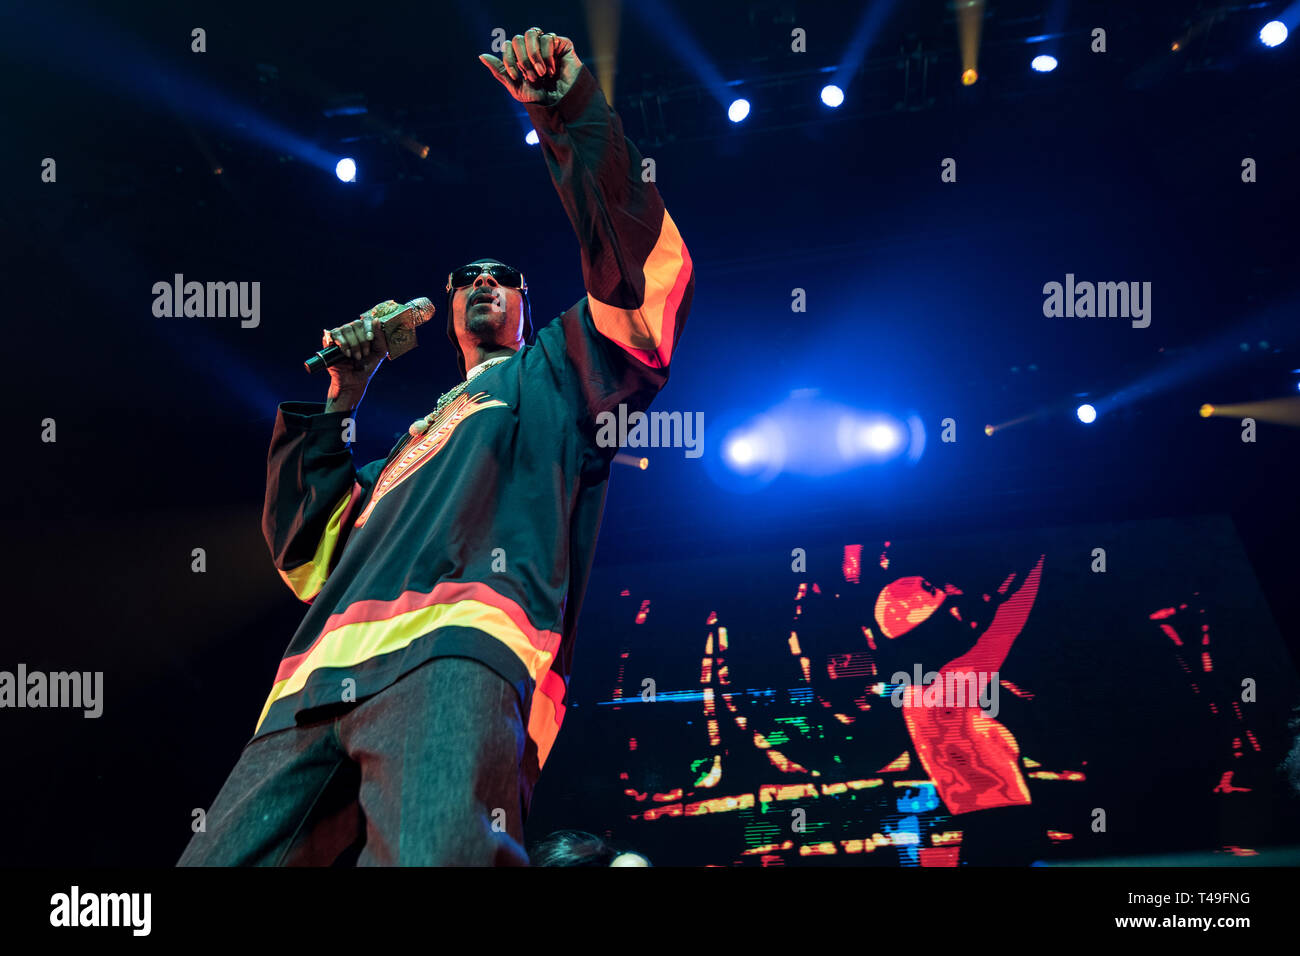 American rapper Snoop Dogg performing at Rogers Arena in Vancouver, BC on February 22nd, 2019 Stock Photo